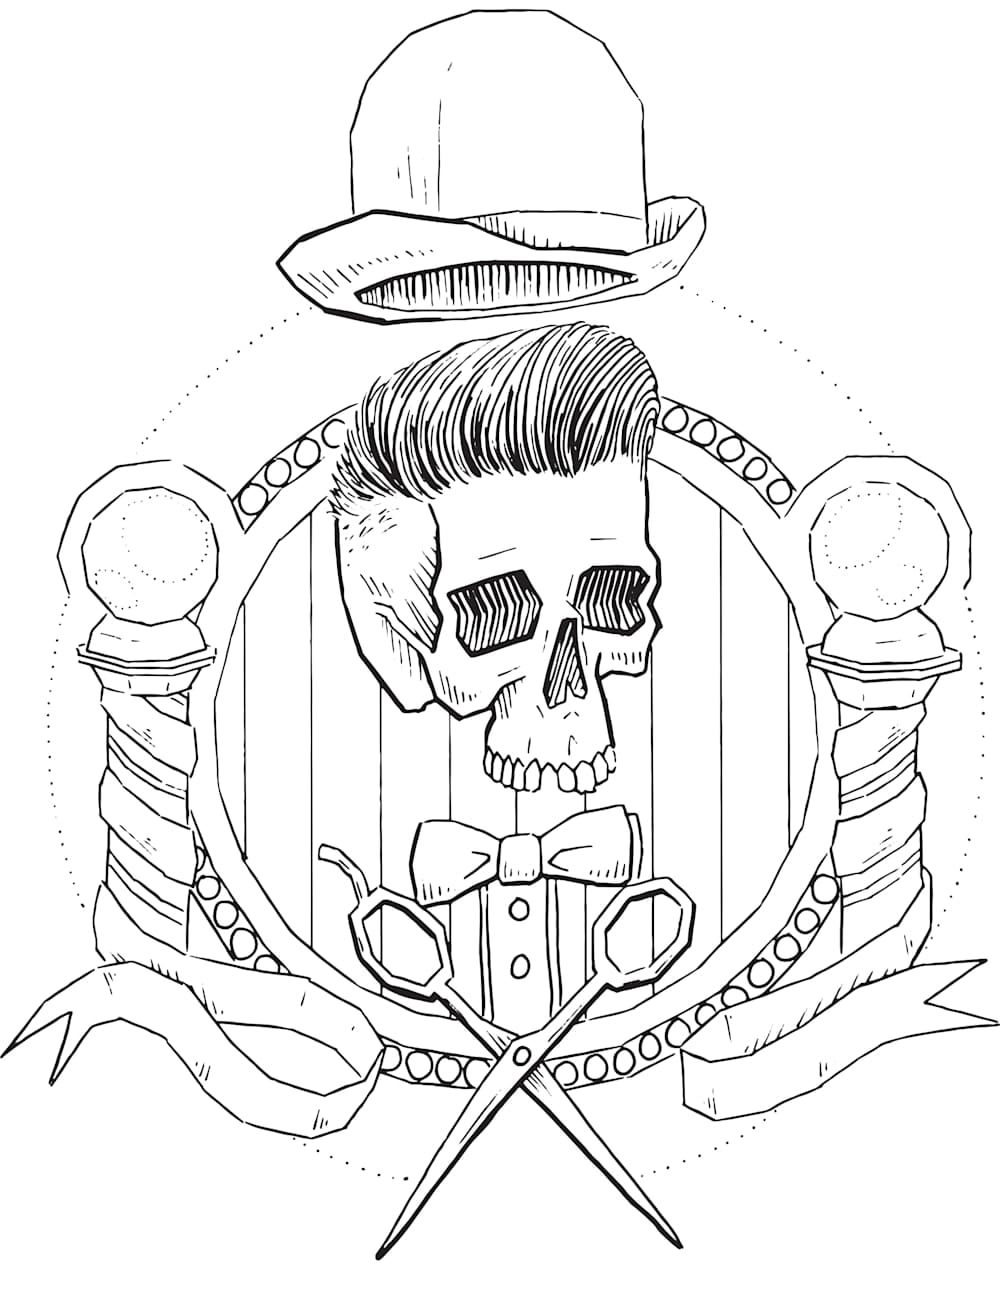 Salon Barber Coloring Coloring Page